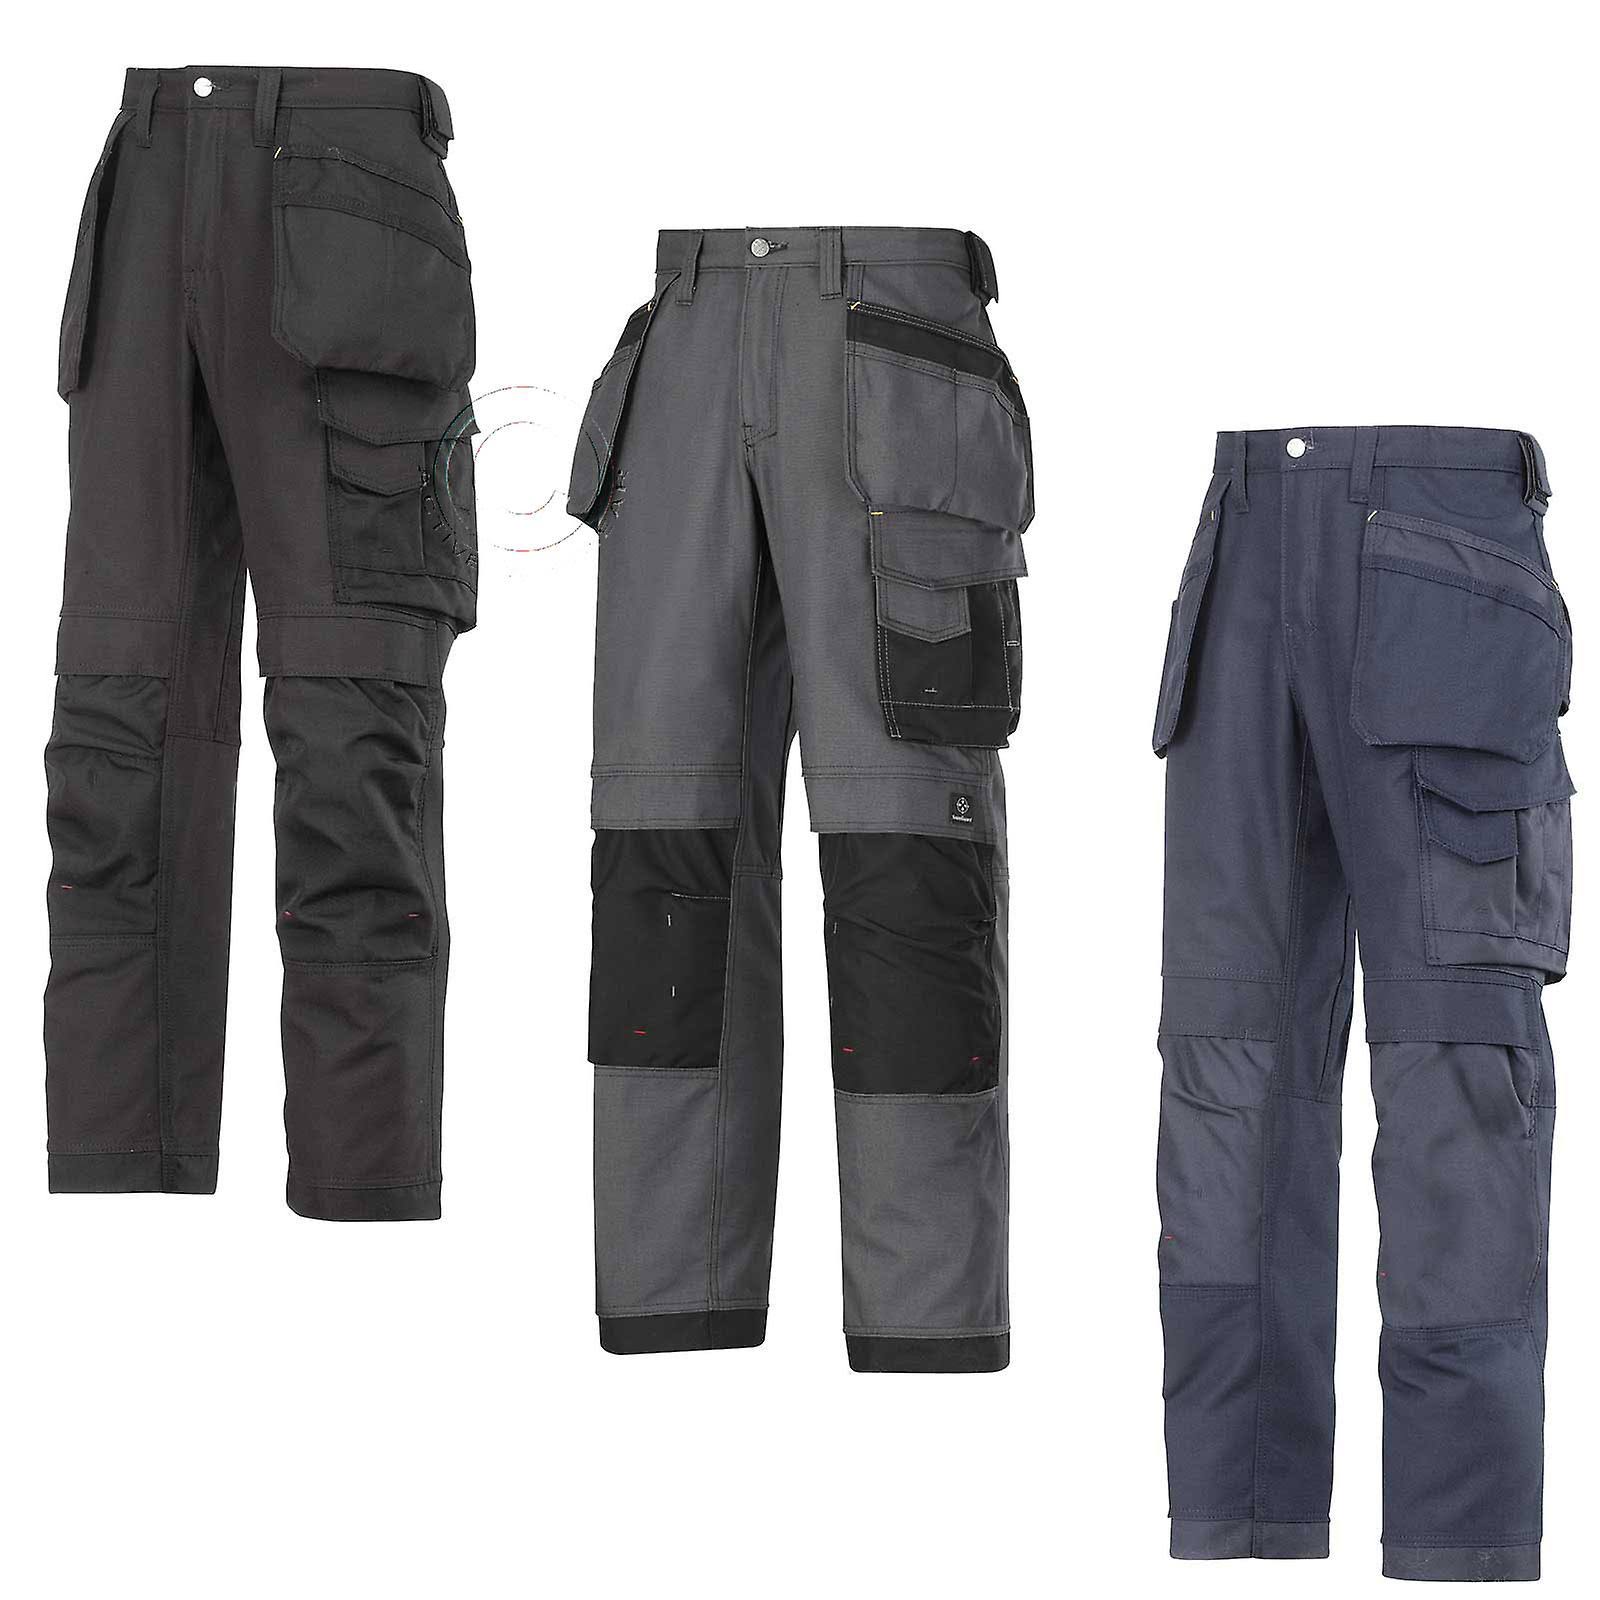 Canvas Snickers Workwear with Holster Pockets Trousers - Steel Gray & Black